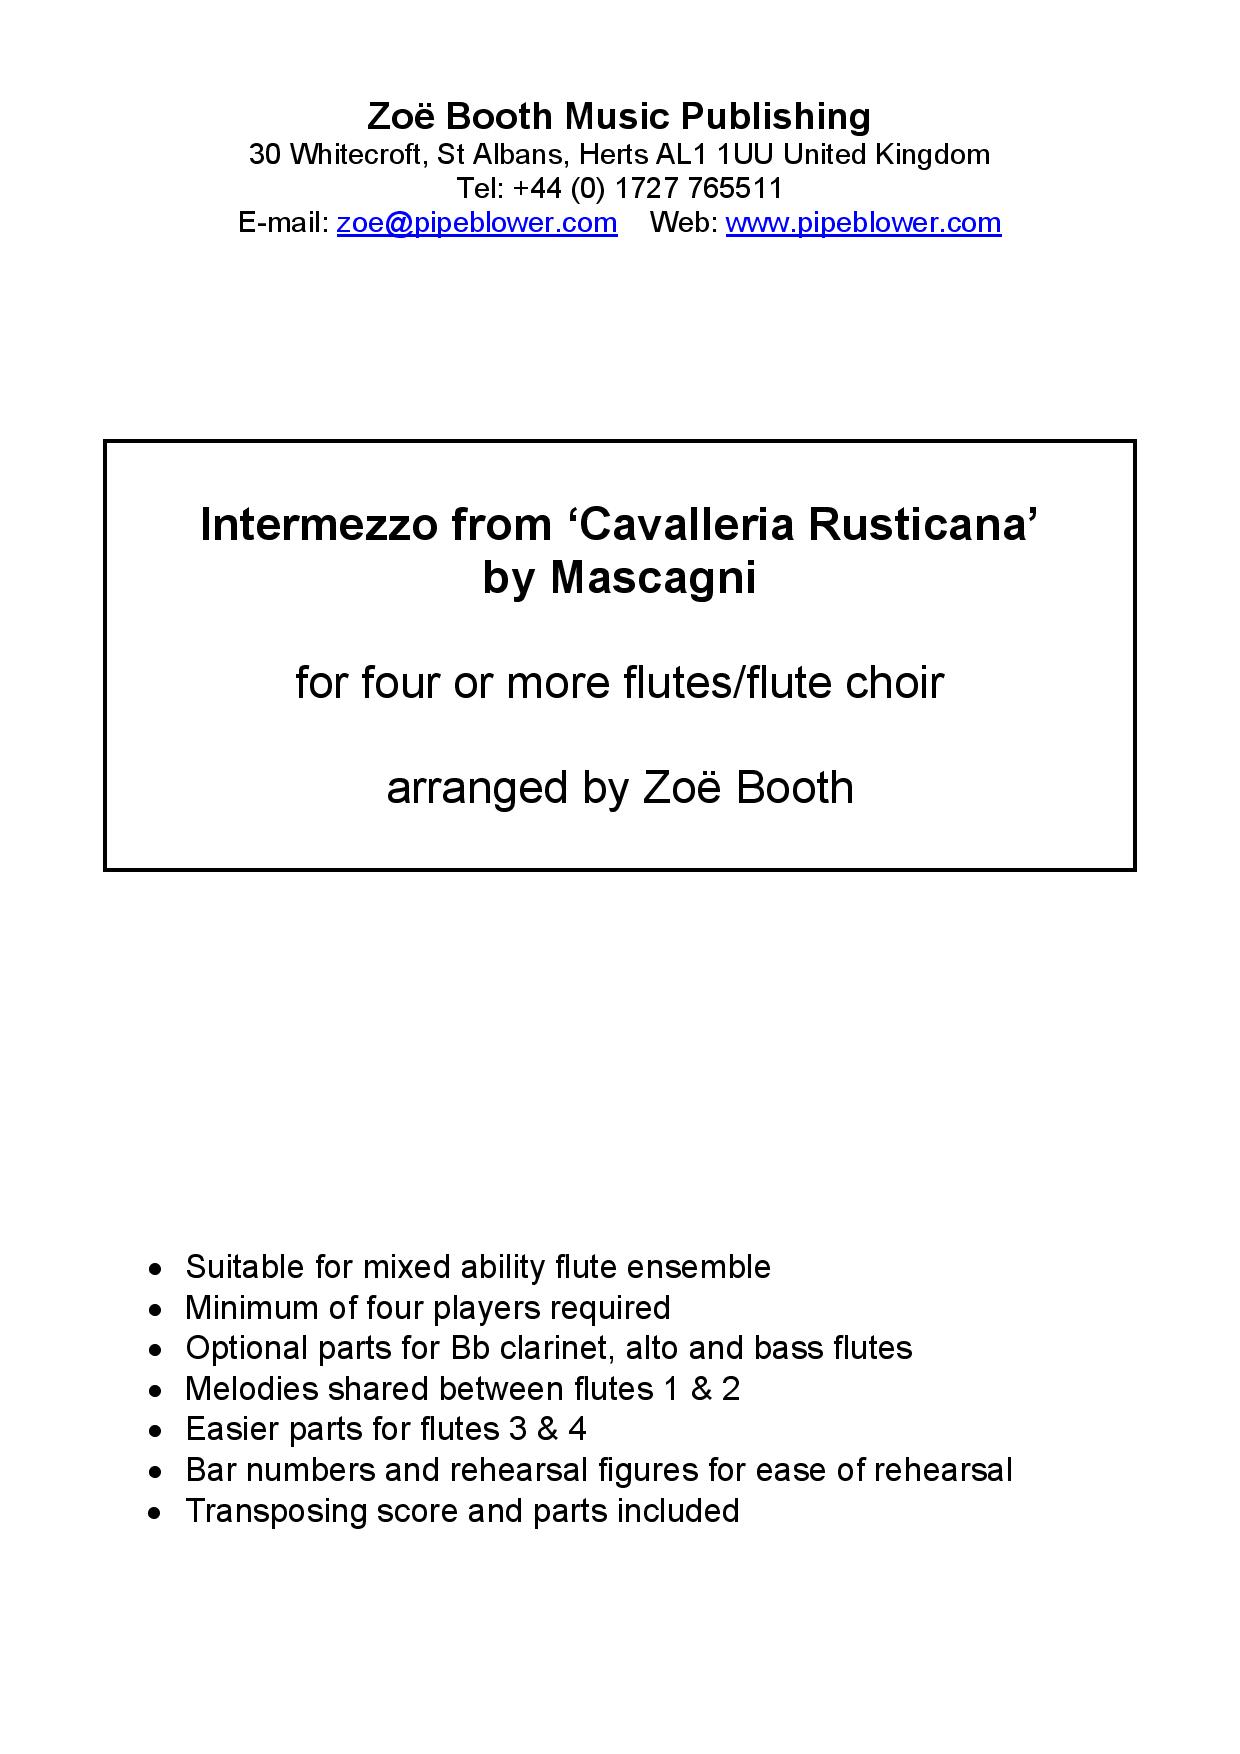 Intermezzo by Mascagni,  arranged by Zoë Booth for four or more flutes/flute choir